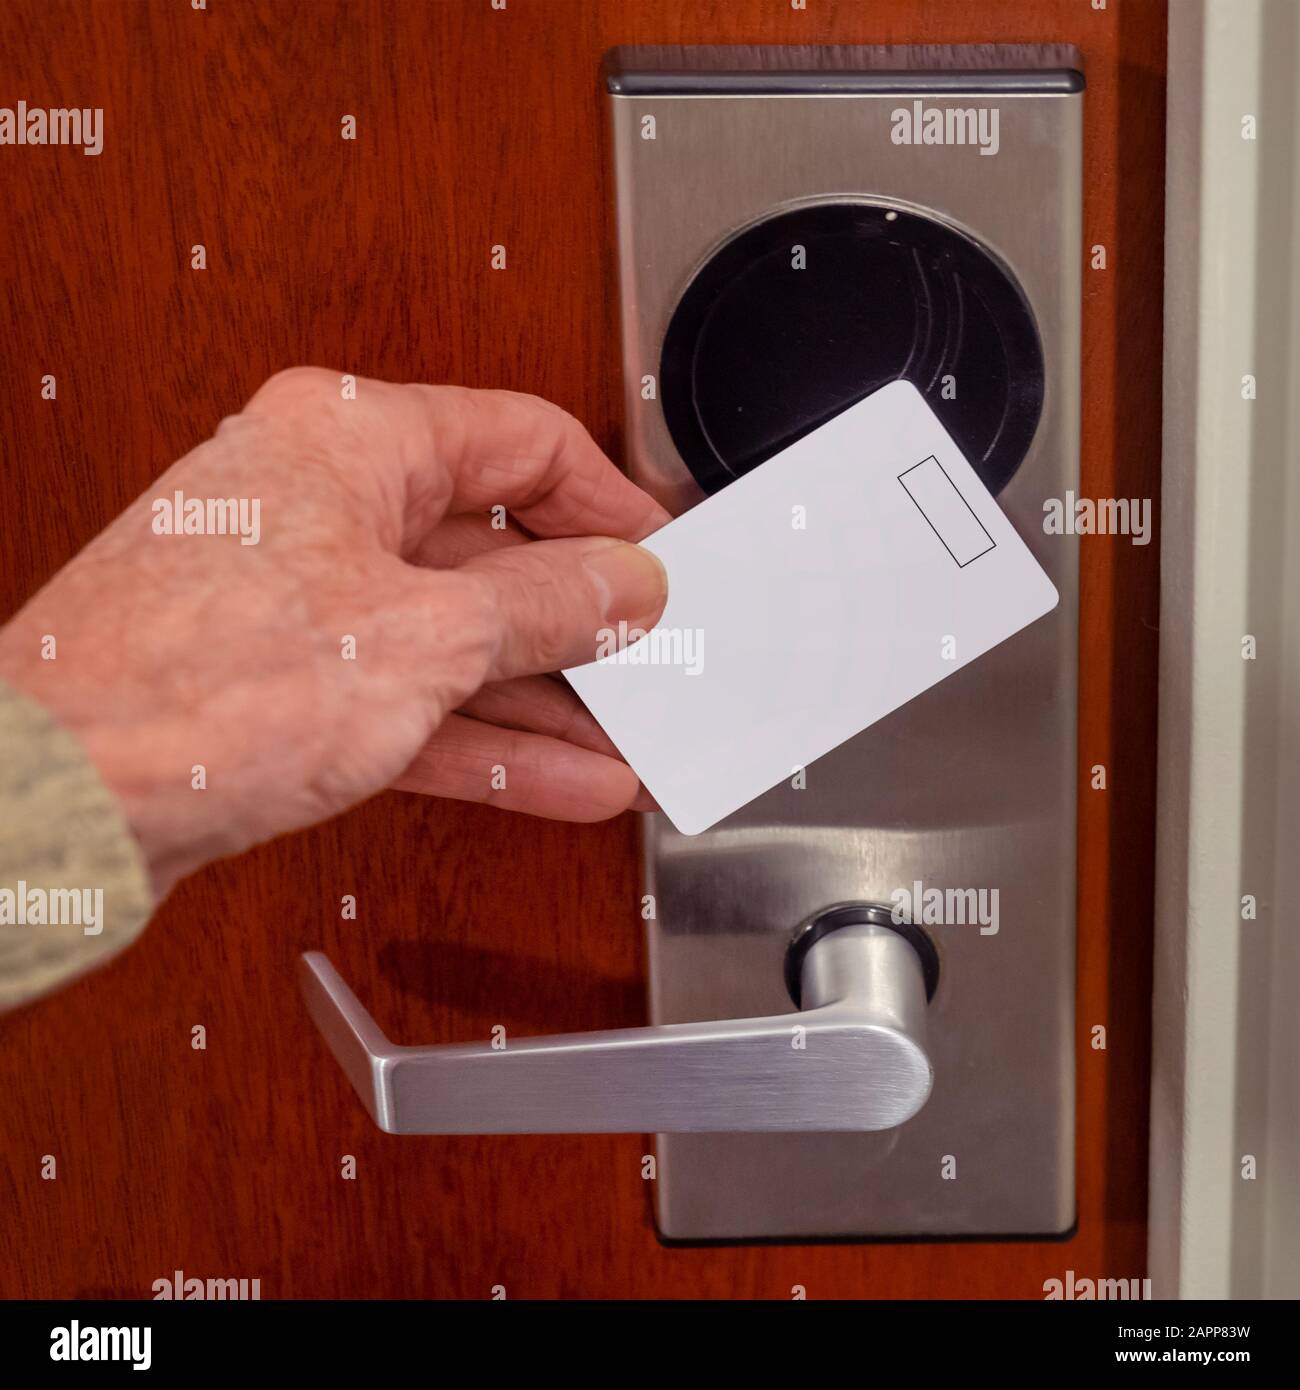 hand swiping key card to open hotel room door. Holding magnetic card for door access control swiping key card to lock and unlock door Stock Photo